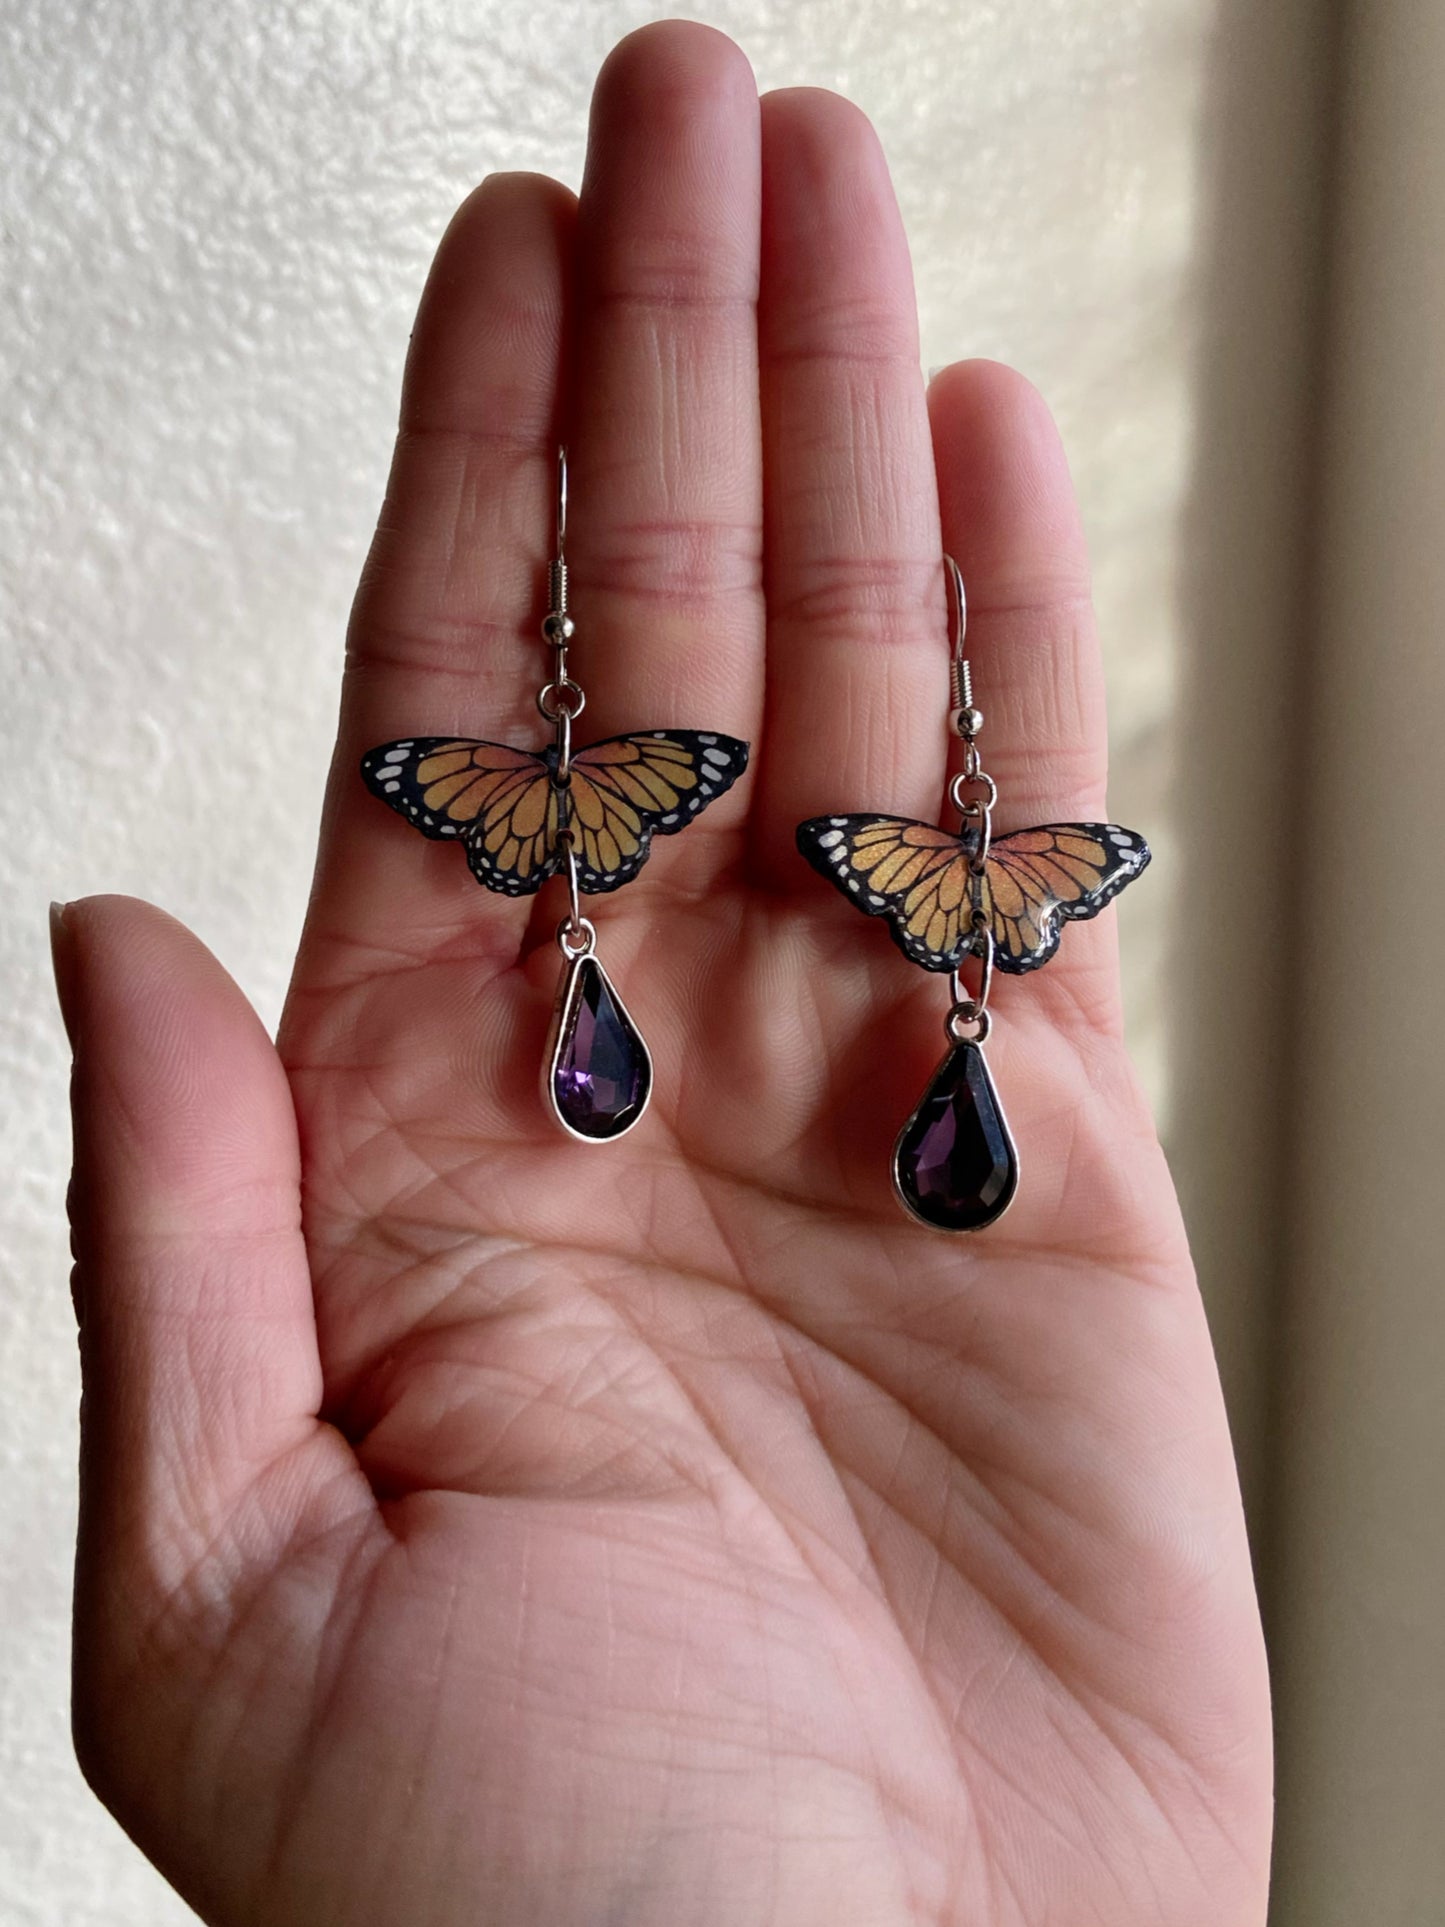 Mini Butterflies- Upcycled paper Monarch earrings with faceted purple glass bead teardrop dangle